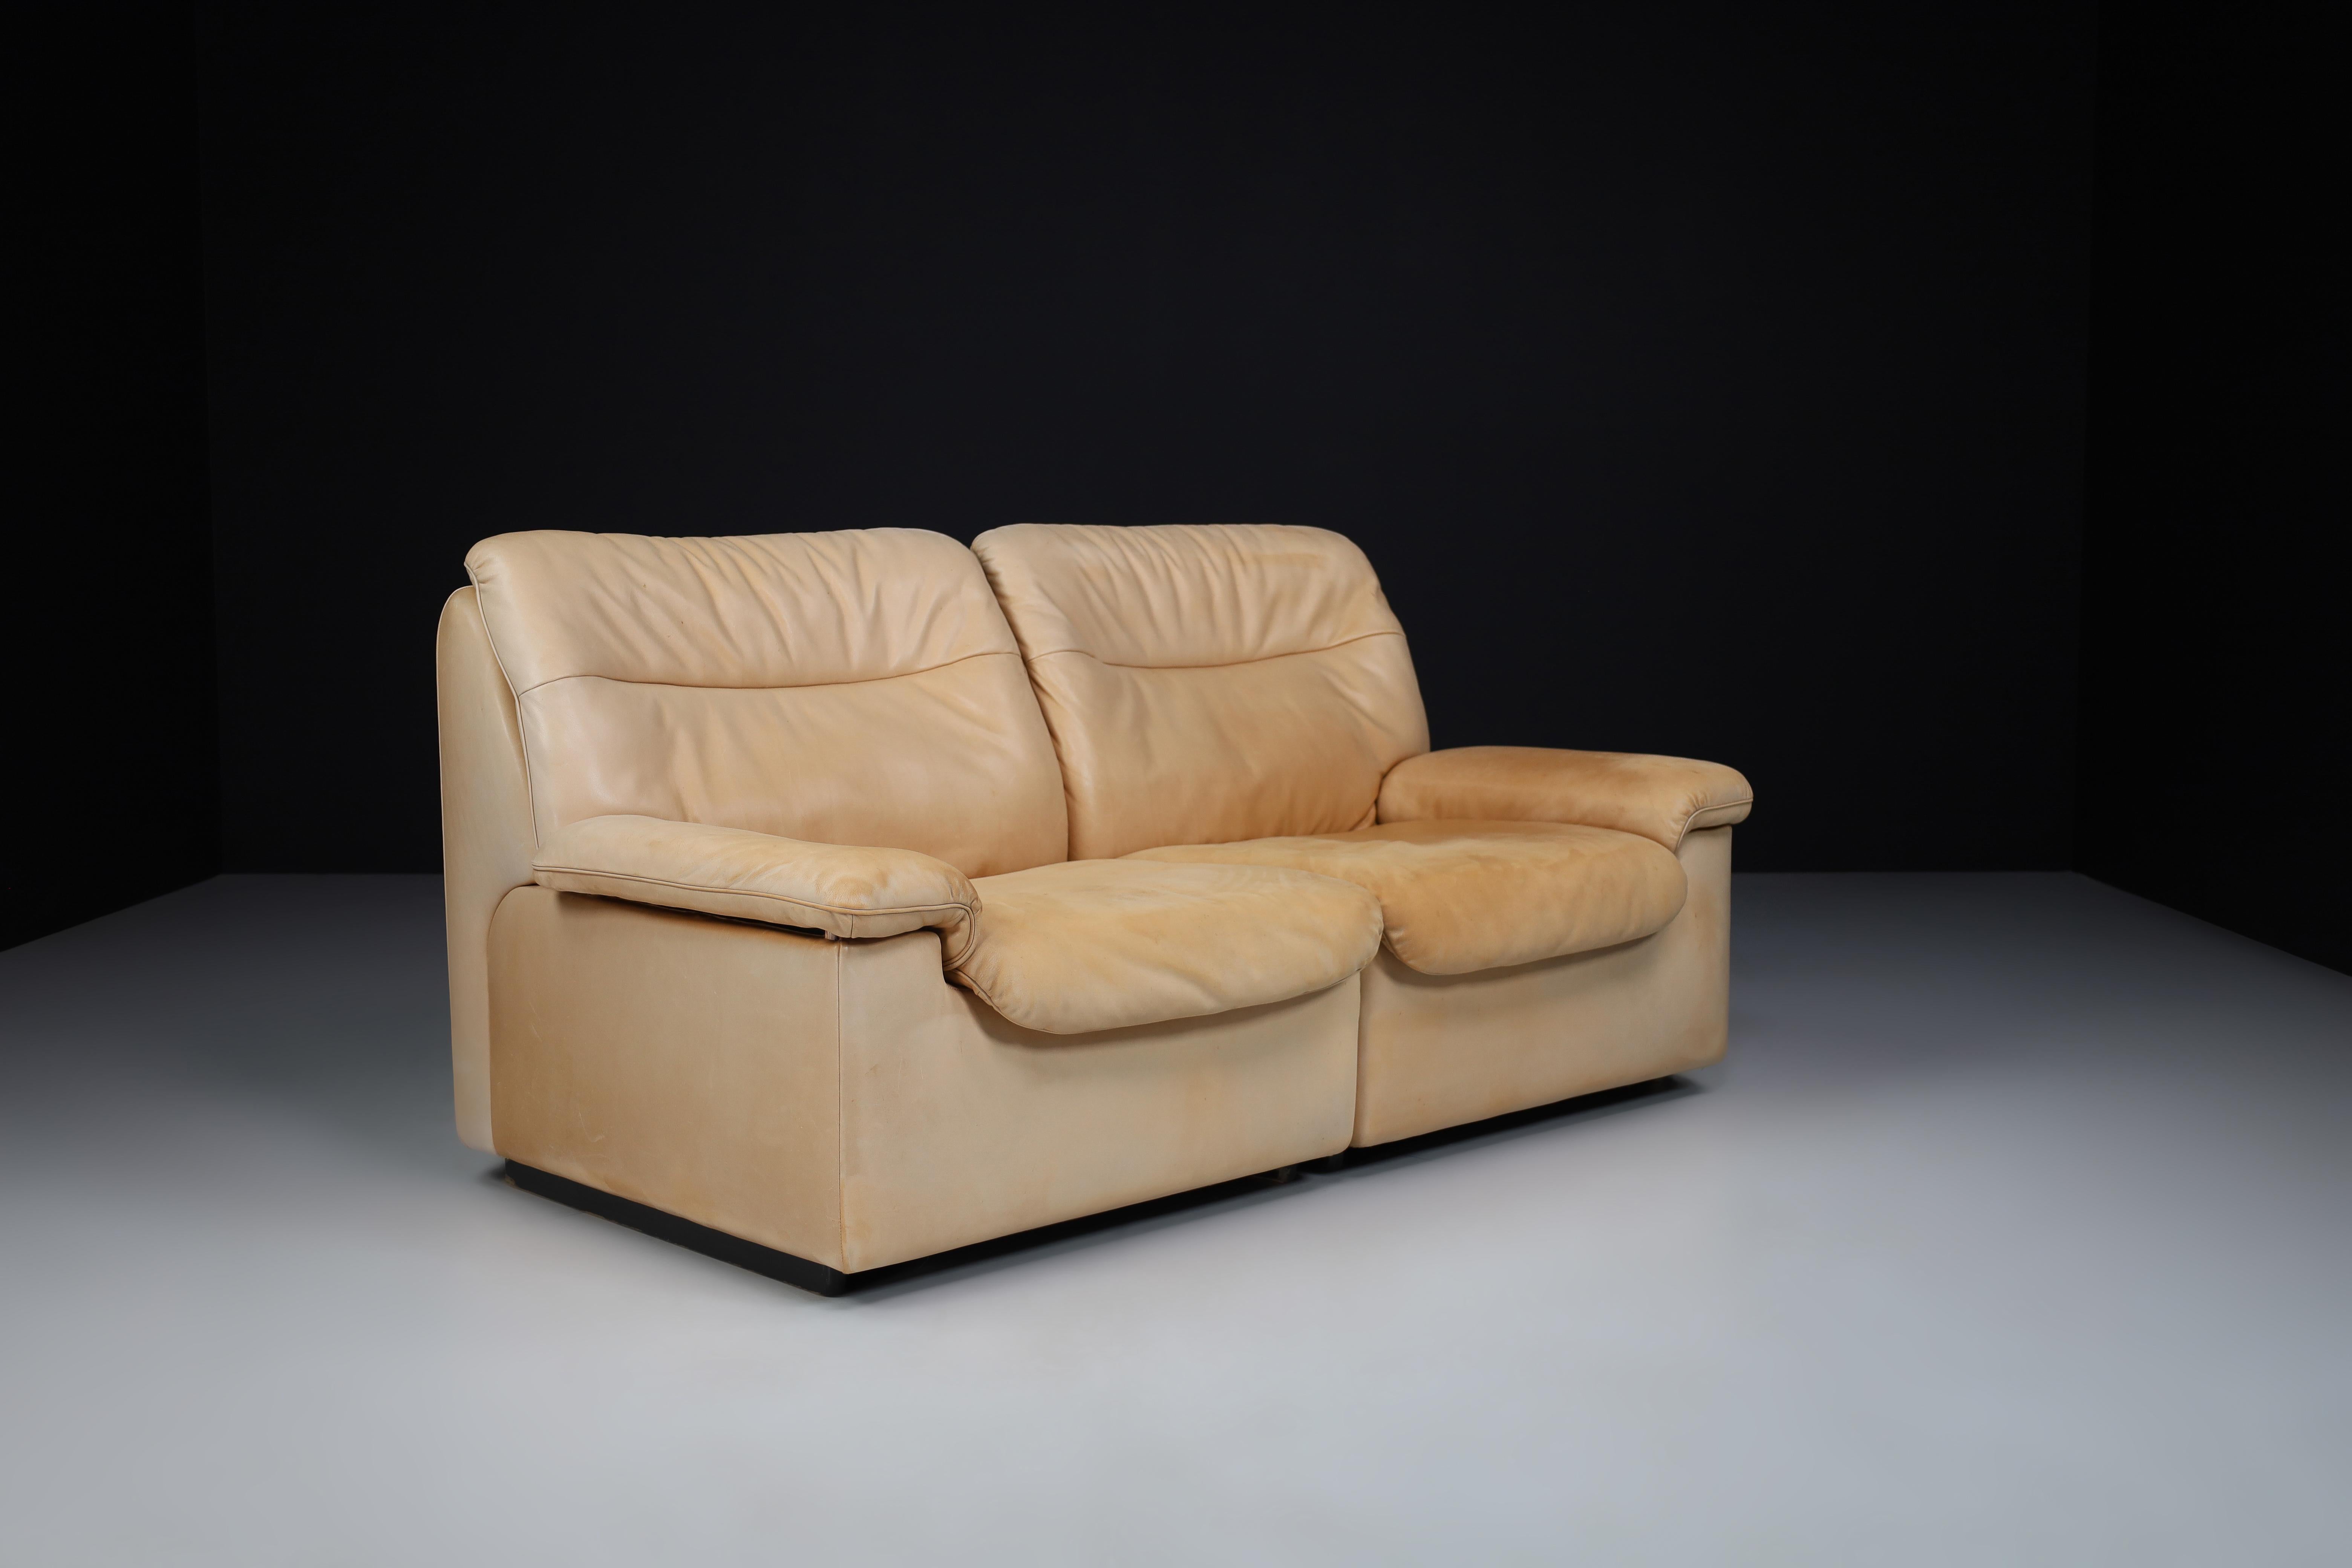 De Sede DS 63 two-seater sofa in leather, Switzerland 1970s

Robust DS-63 modular two-seater sofa. This De Sede sofa ensures ultimate comfort and building quality with its solid wooden frame and thick hand-stitched leather upholstery. Nice